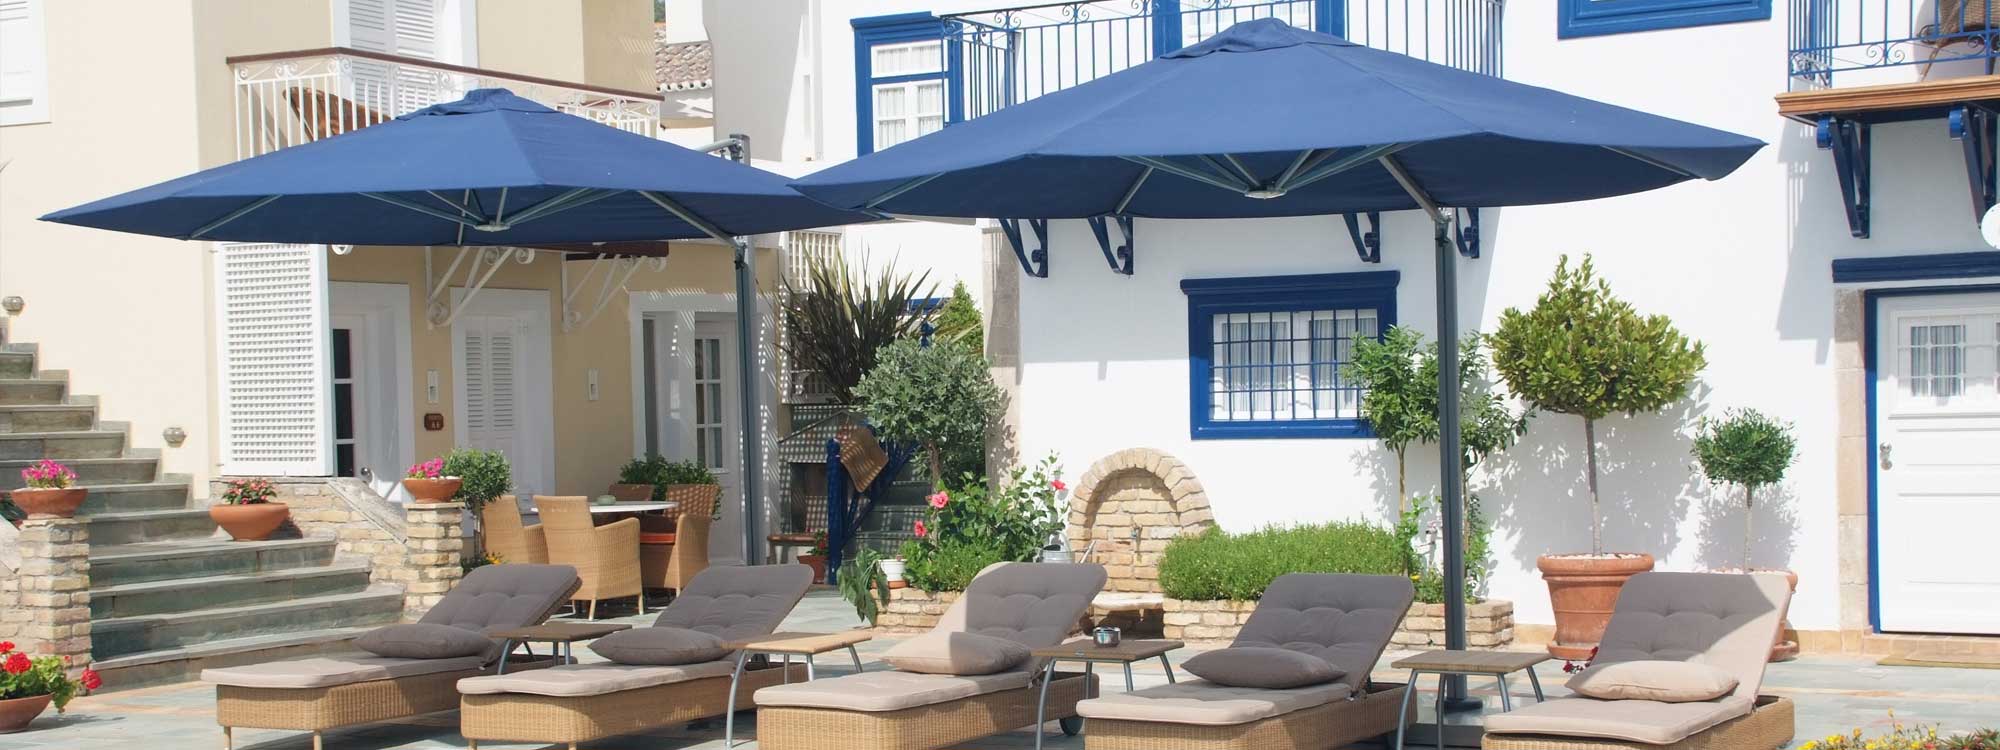 Image of pair of Prostor P7 blue side post parasols above 4 sun loungers on a sunny poolside